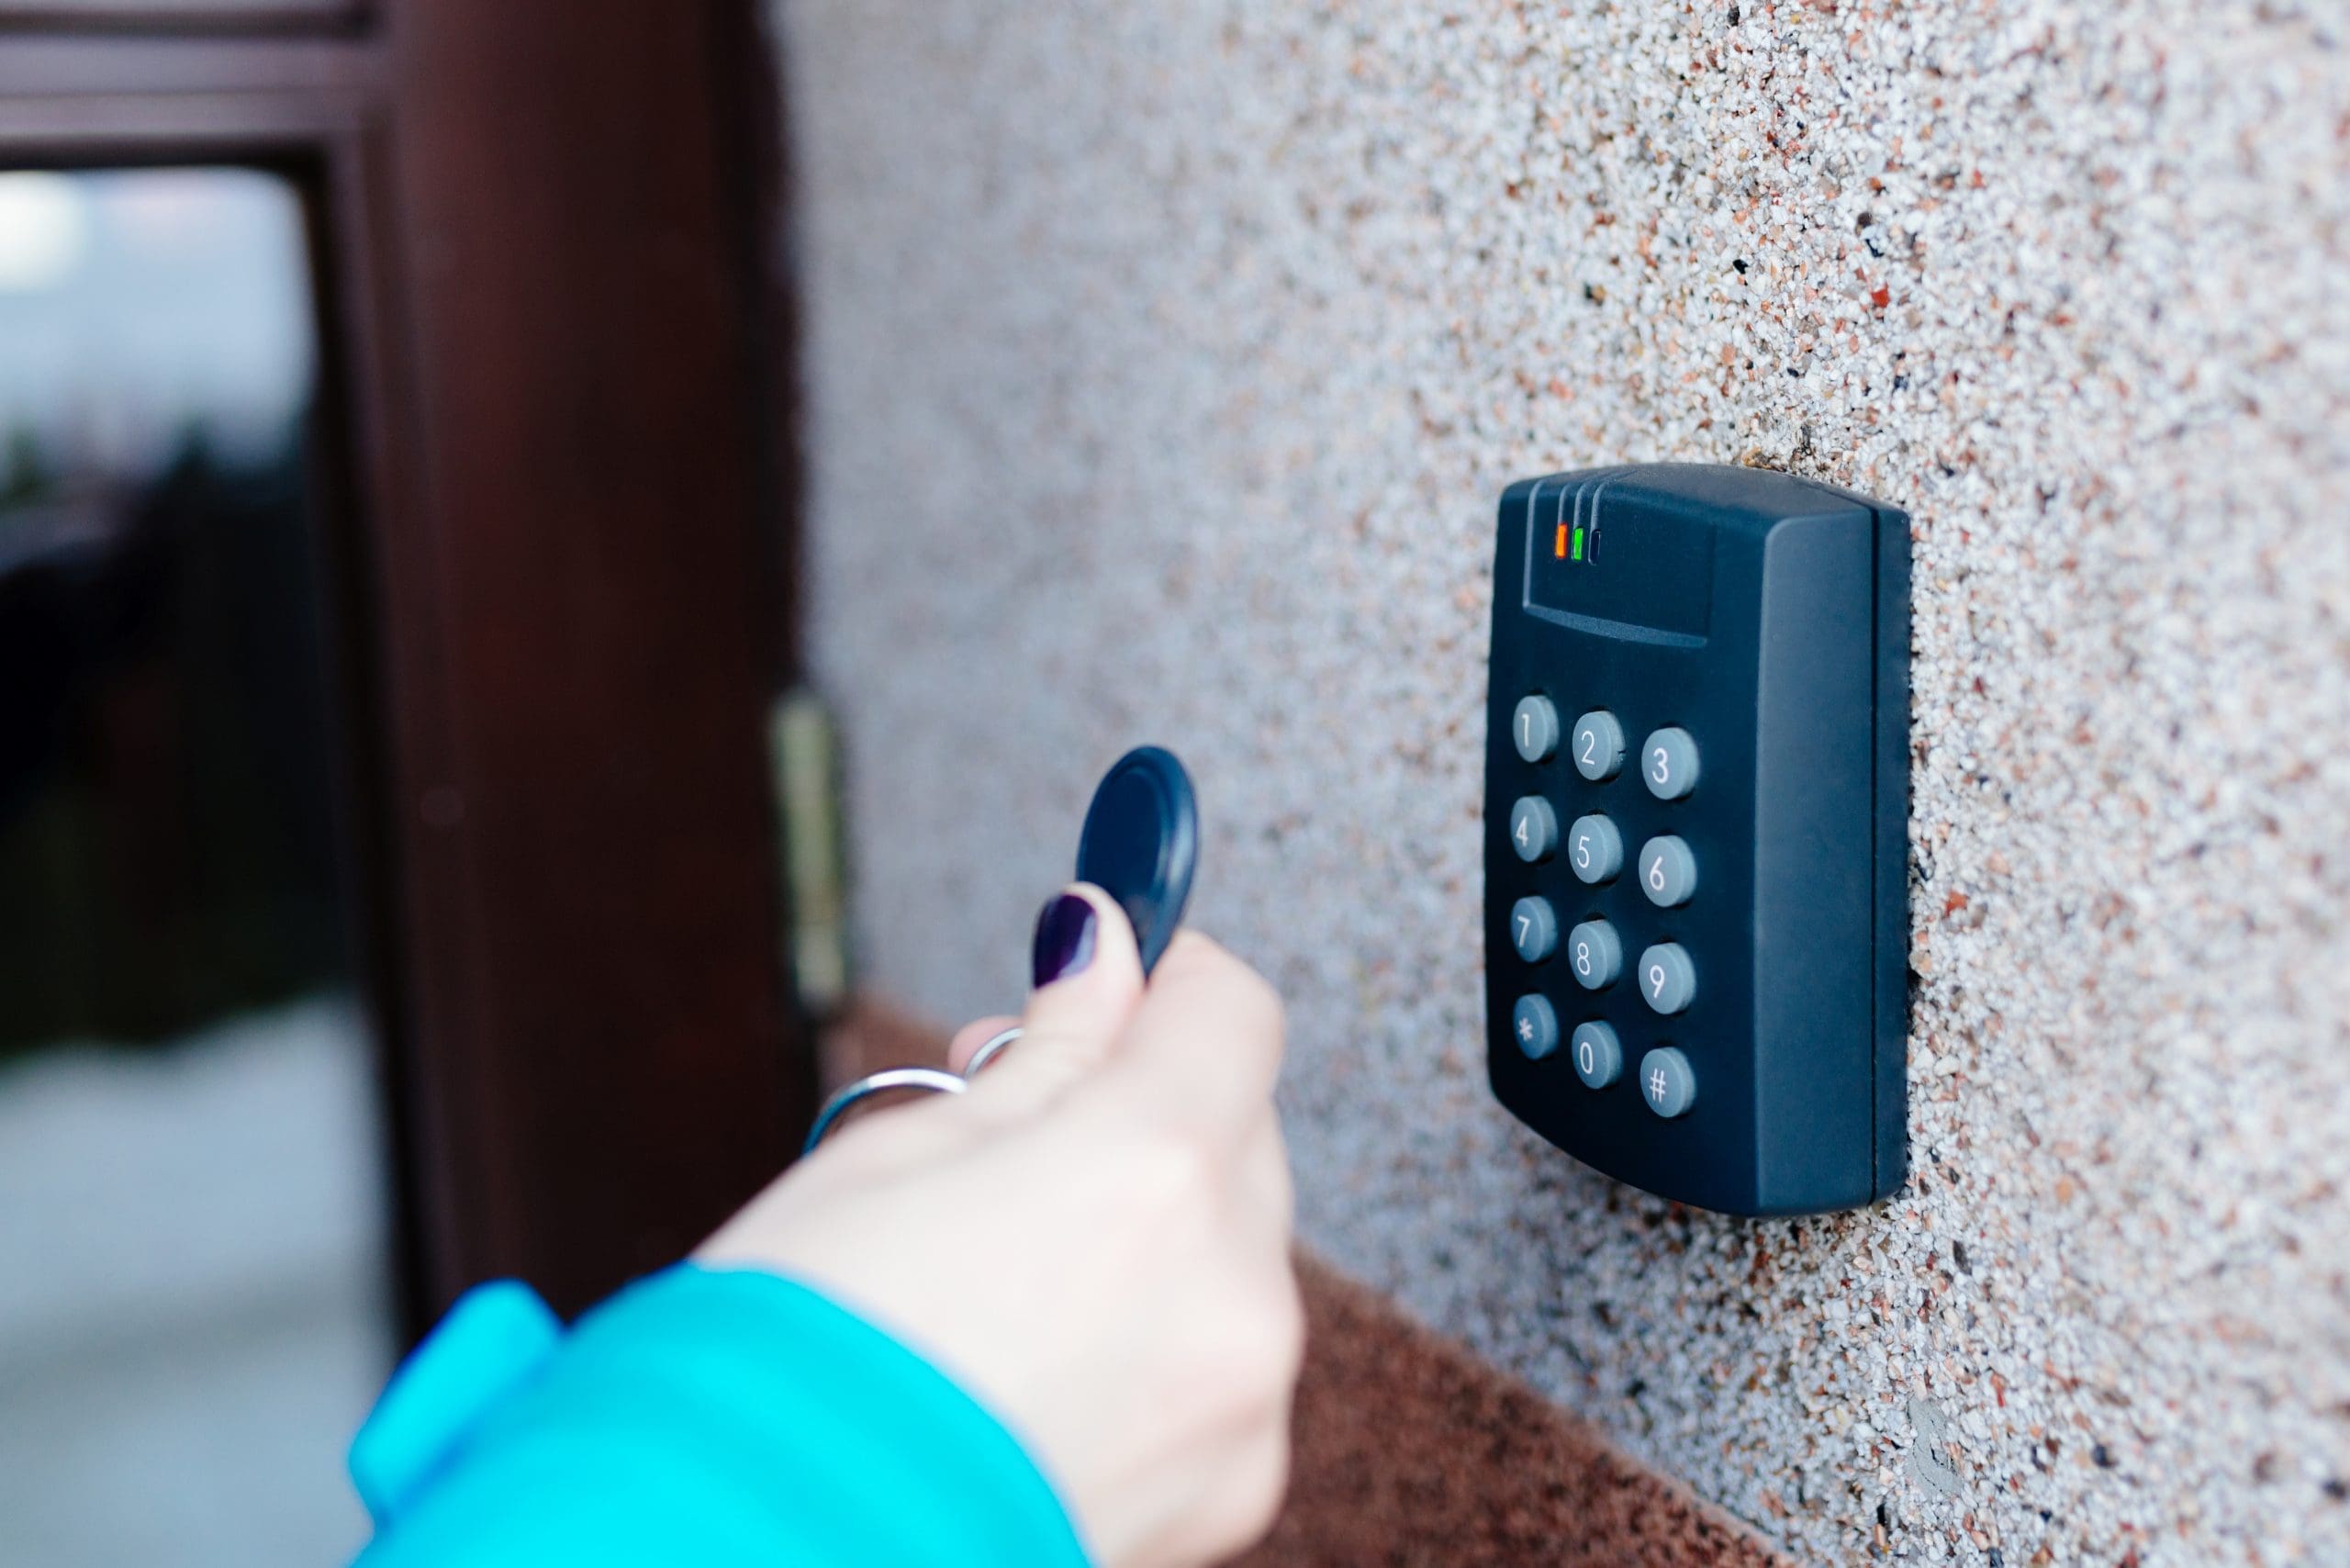 Featured image for “WHAT IS ACCESS CONTROL AND WHY DO I NEED IT?”